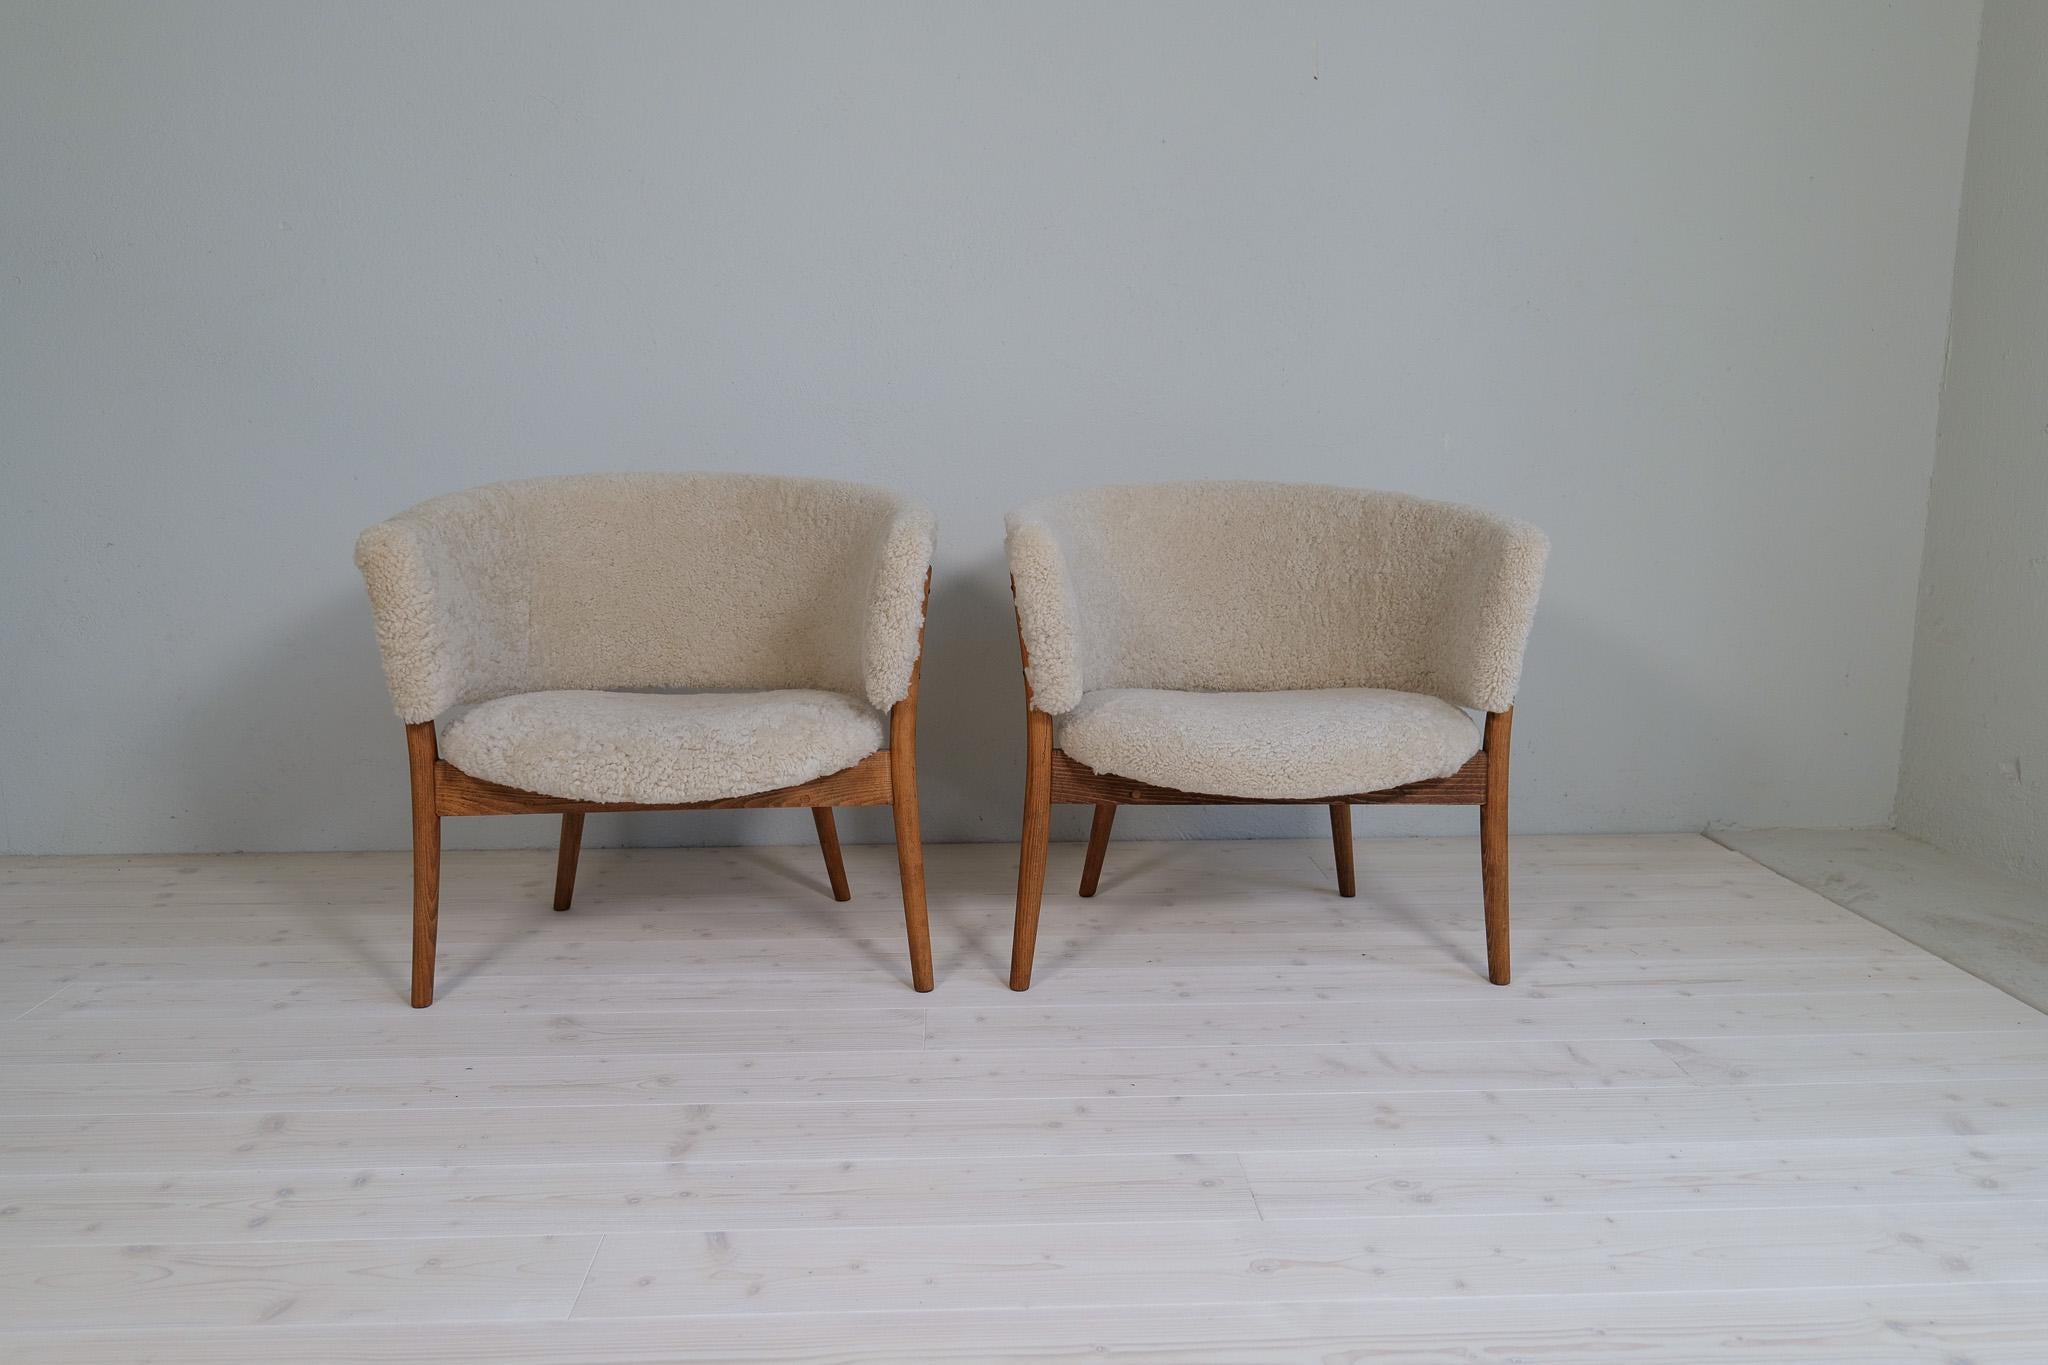 Swedish Mid-Century Lounge Charis in Sheepskin/Shearling and Stained Wood, Sweden, 1962 For Sale